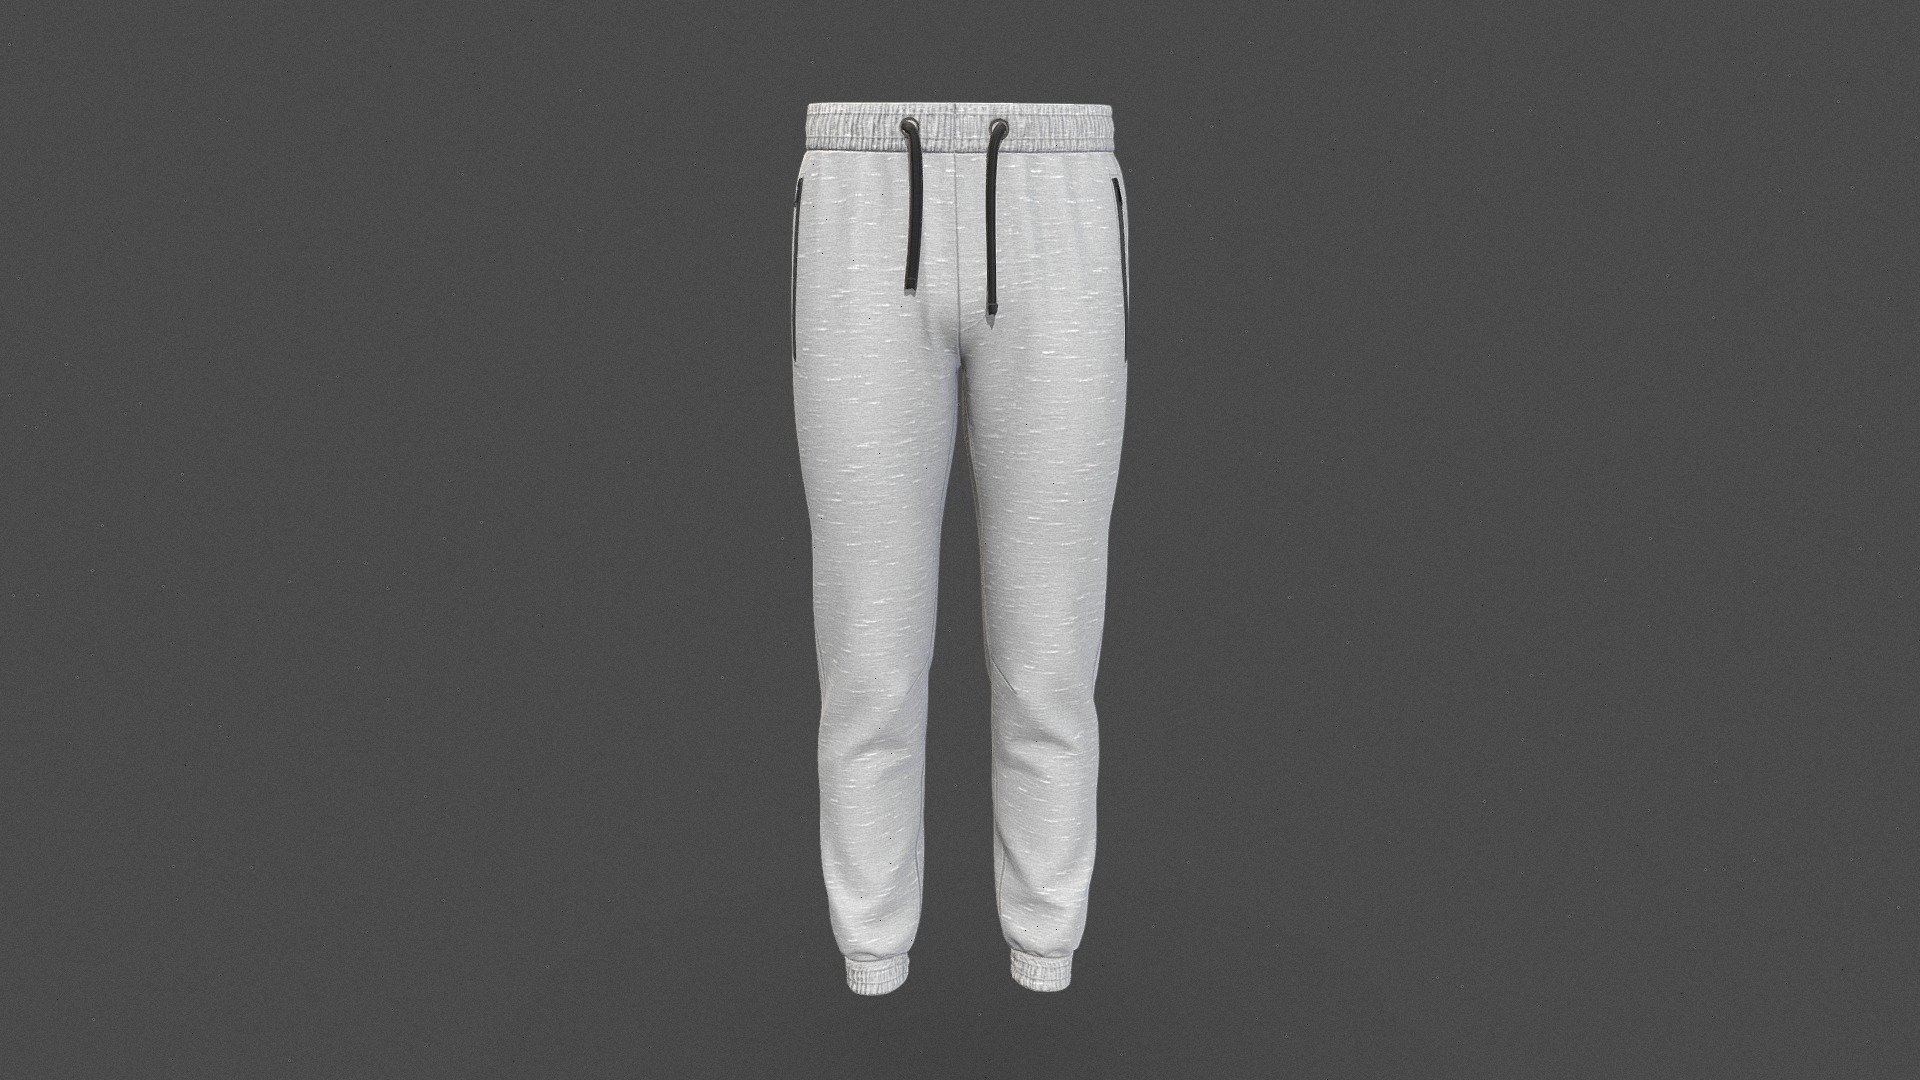 Men Gray Color Heather Jogger
Version V1.0

Realistic high detailed Men Trouser with high resolution textures. Model created by our unique processing &amp; Optimized for 3D web and AR / VR

Features

Optimized &amp; NON-Optimized obj model with 4K texture included




Optimized for AR/VR/MR

4K &amp; 2K fabric texture and details

Optimized model is 3.14MB

NON-Optimized model is 16.1MB

Unit measurement of obj is cm

Woven fabric texture and print details included

GLB file in 2k texture size is 3.34MB

GLB file in 4k texture size is 12.1MB (Game &amp; Animation Ready)

Unit measurement of glb is meter

Suitable for web application configurator development.

Fully unwrap UV

The model has 1 material

Includes high detailed normal map

Unit measurement was inch

Triangular Mesh with 18.2k Vertices

Texture map: Base color, OcclusionRoughnessMetallic(ORM), Normal

For more details or custom order send email: hello@binarycloth.com


Website:binarycloth.com - Men Gray Color Heather Jogger - Buy Royalty Free 3D model by BINARYCLOTH (@binaryclothofficial) 3d model